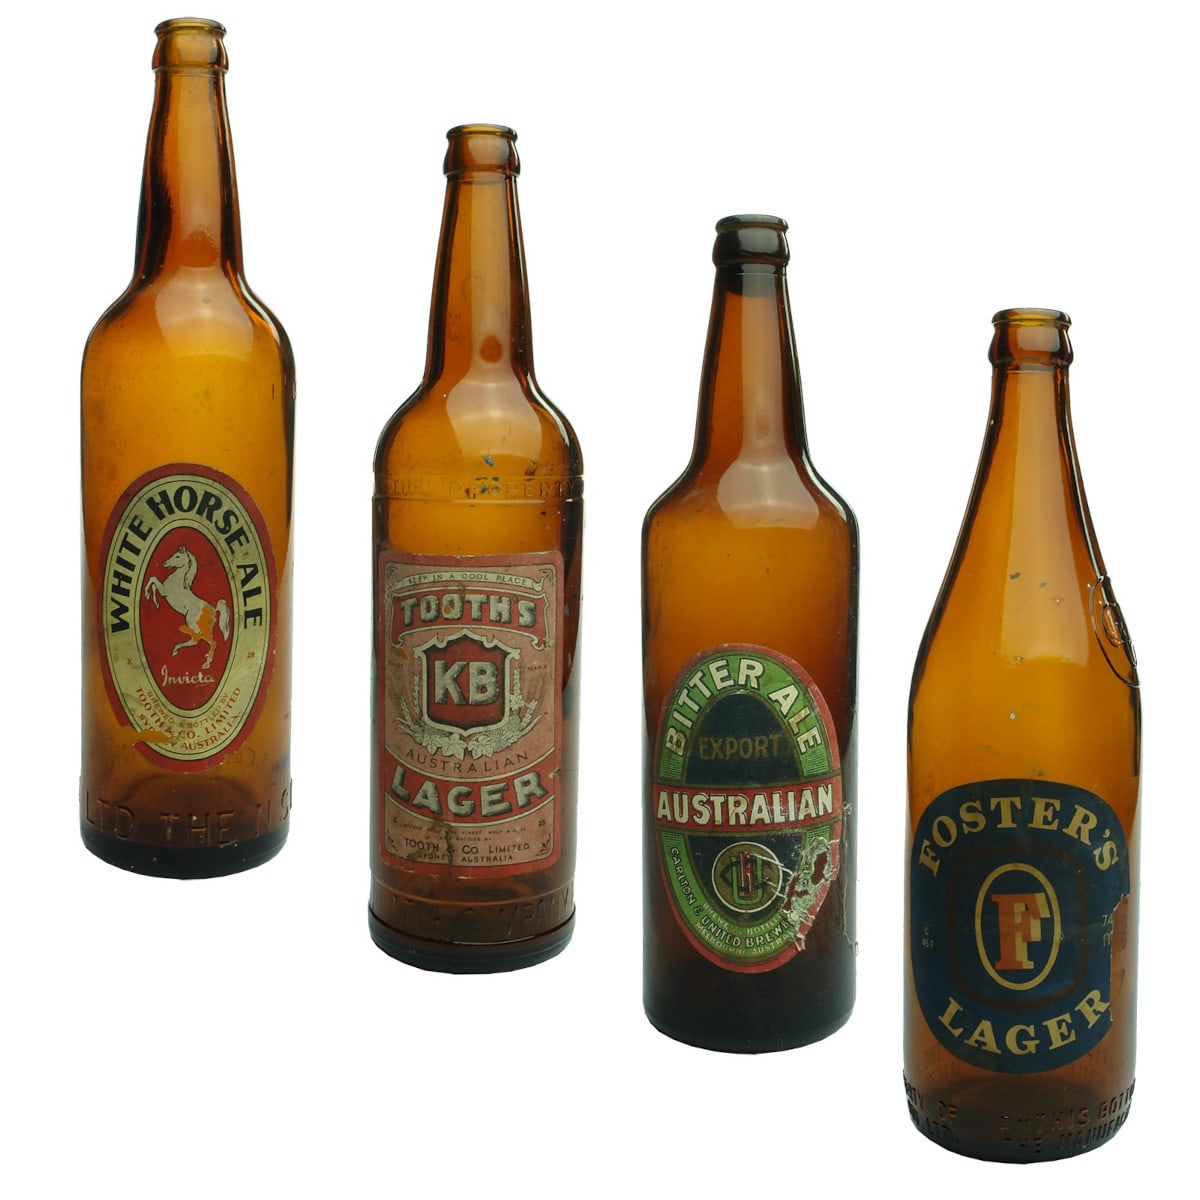 4 labelled Crown Seal Beers: White Horse Ale; KB Lager; Australian Export Bitter Ale; Foster's Lager. (Tooth & Co and CUB) (New South Wales & Victoria)